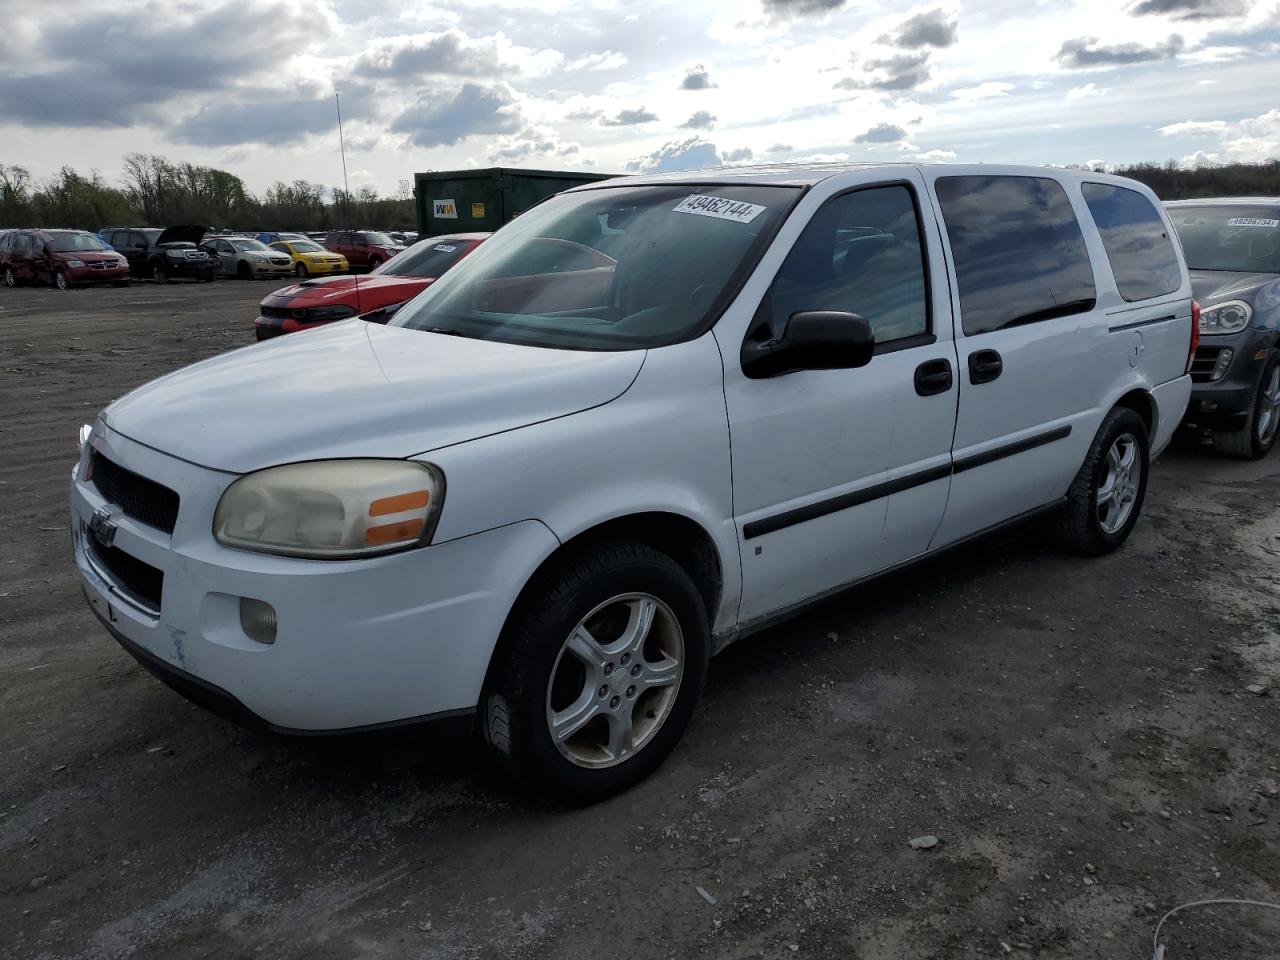 vin: 1GNDV23148D132774 1GNDV23148D132774 2008 chevrolet uplander 3900 for Sale in 62205 1001, Il - Southern Illinois, Cahokia Heights, Illinois, USA